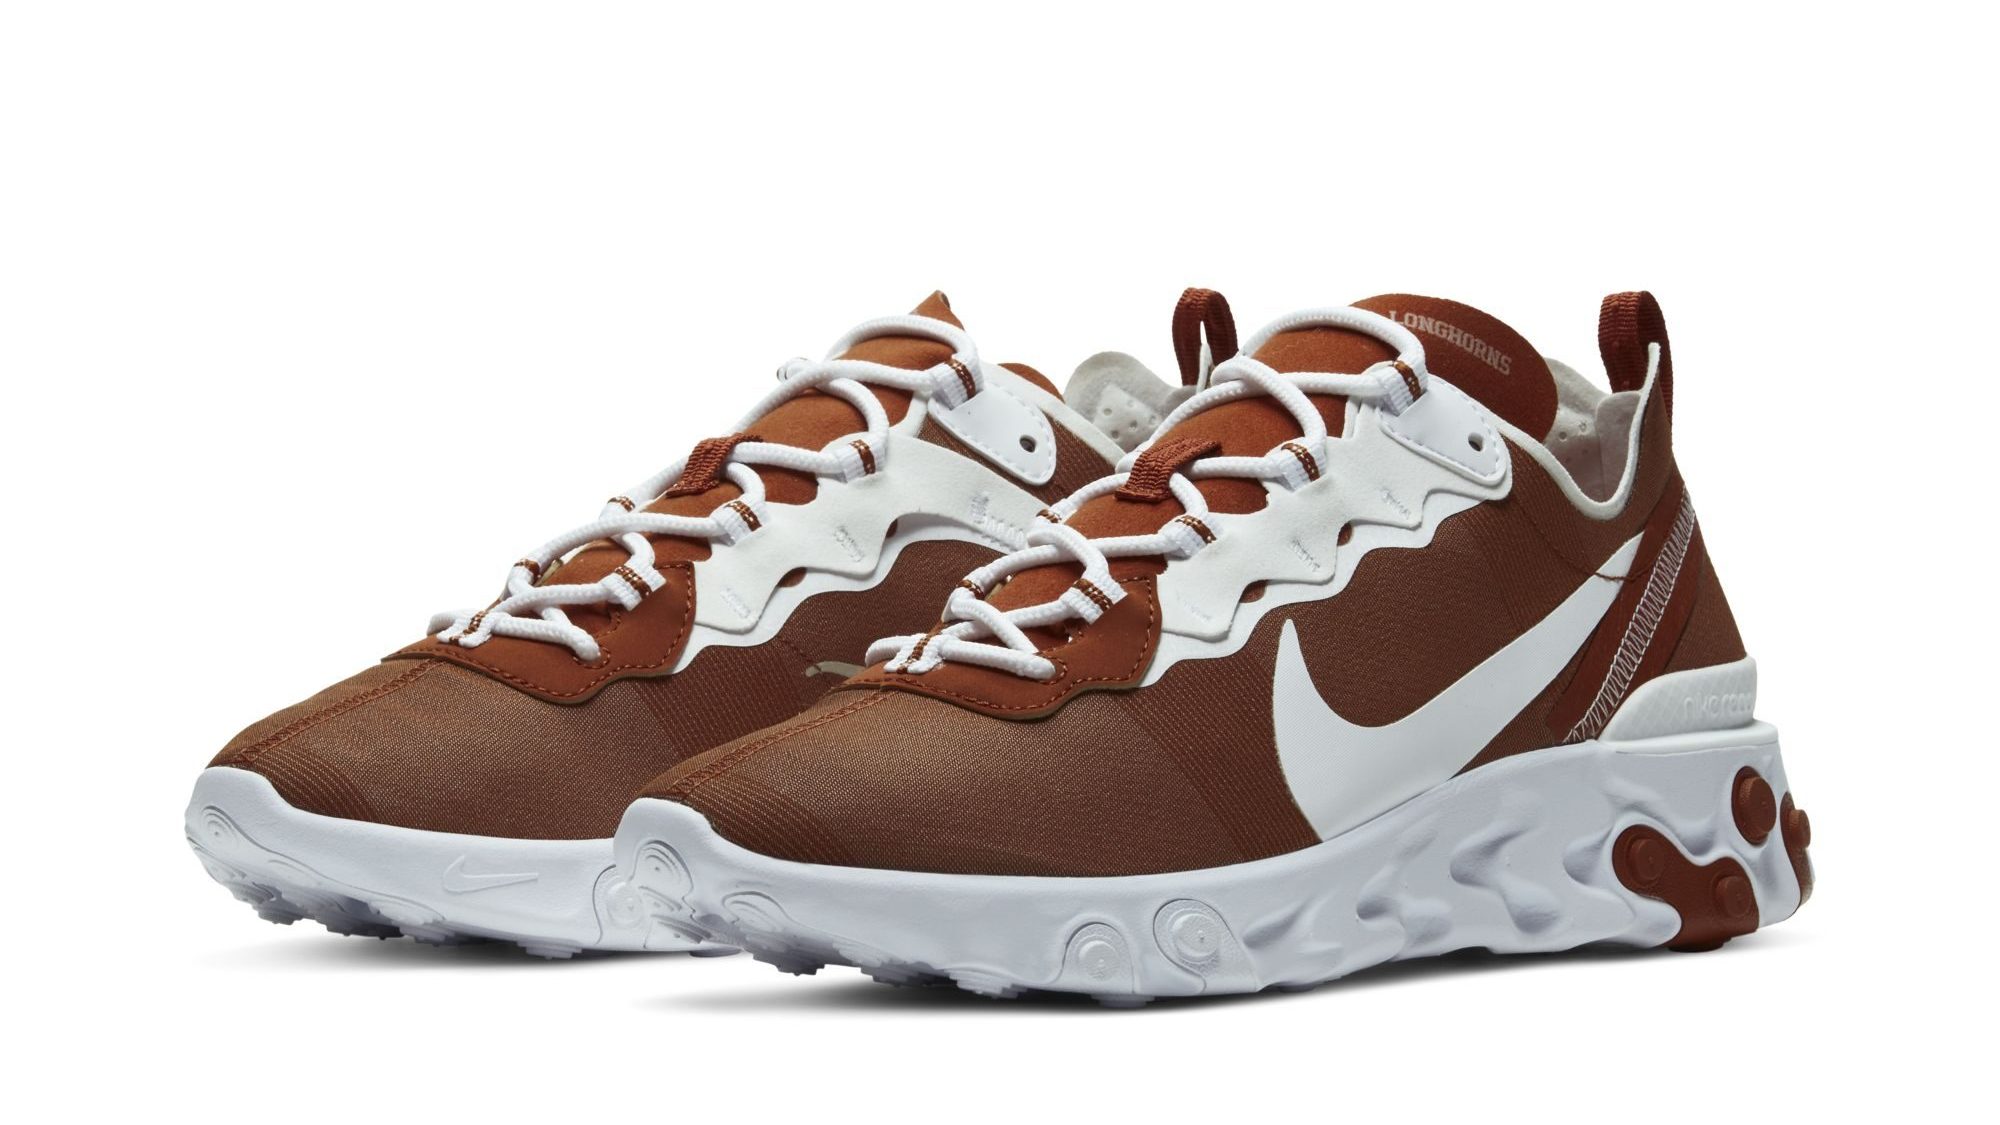 The Nike React Element 55 gets the 